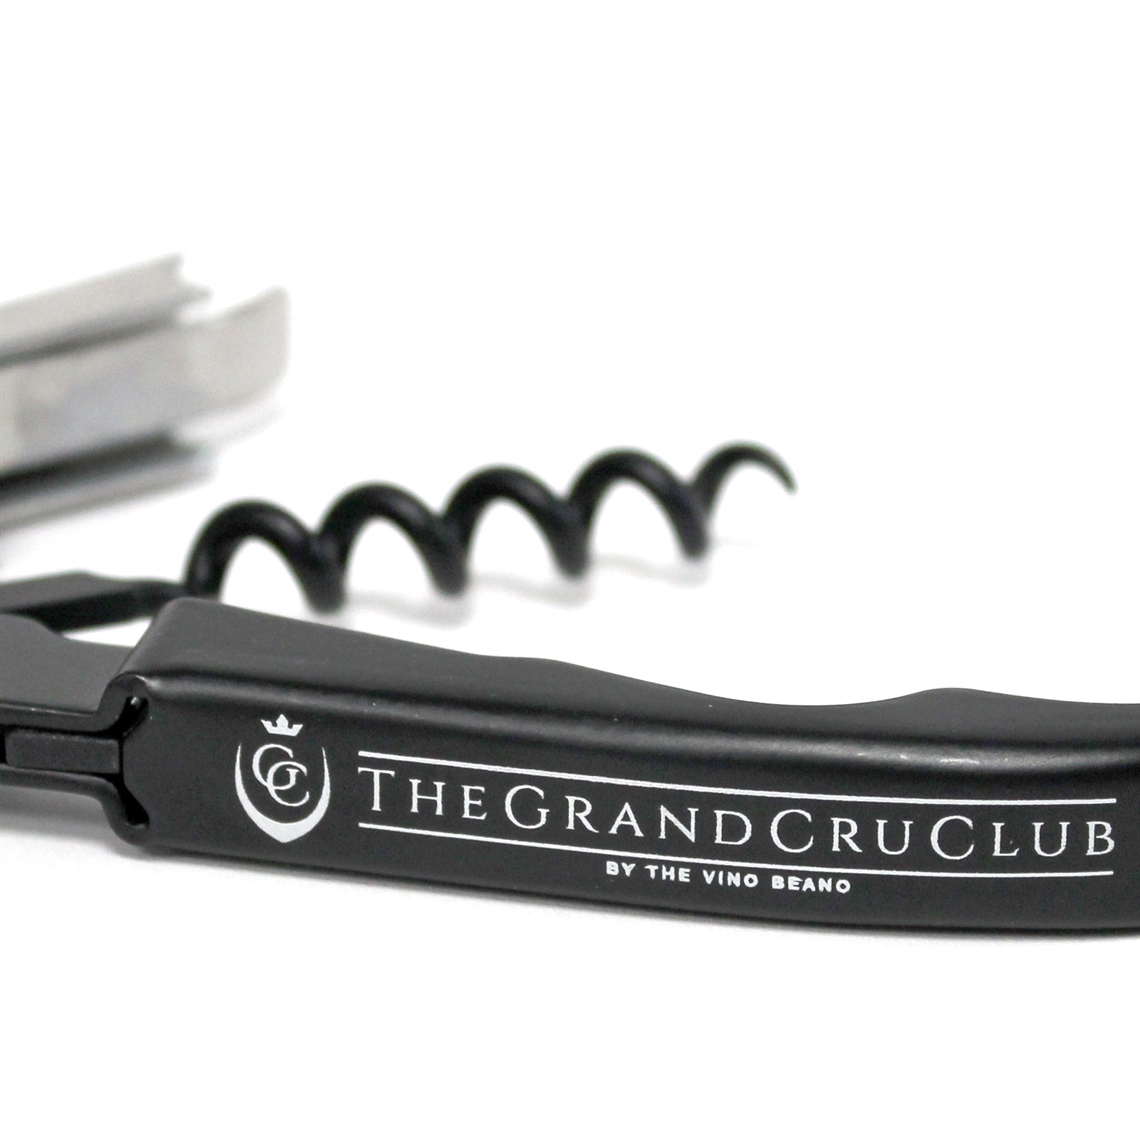 View more corkscrews from our Branded Corkscrews & Bottle Openers range